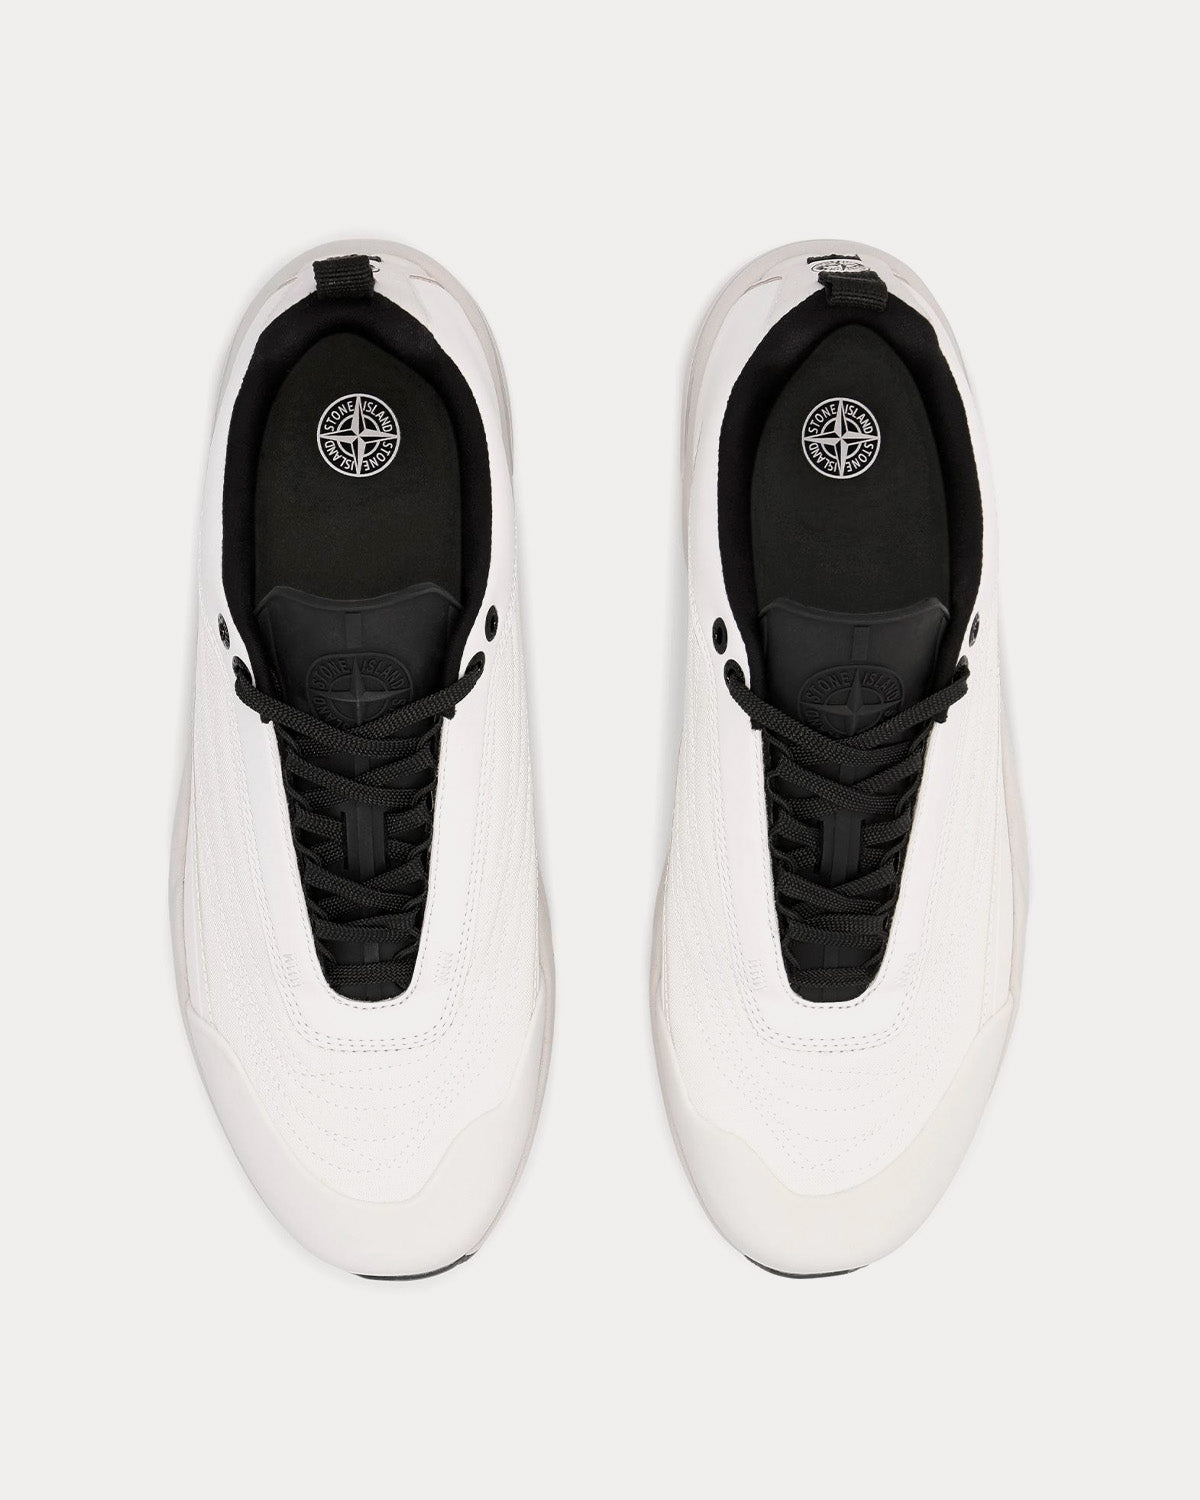 Stone Island - S0303 White Low Top Sneakers